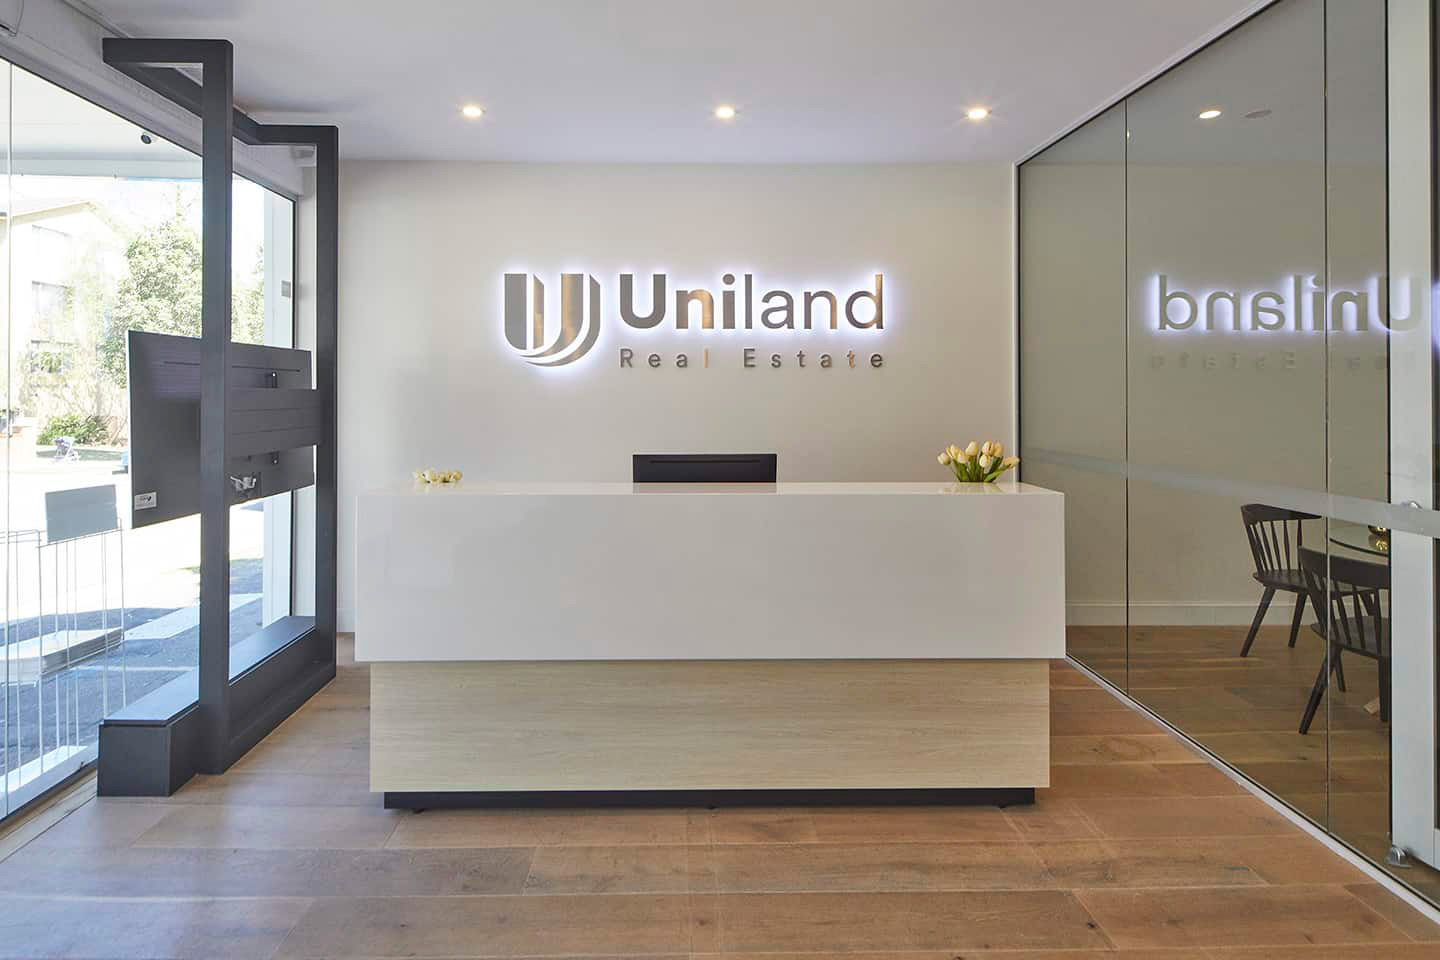 Uniland reception office fit out design